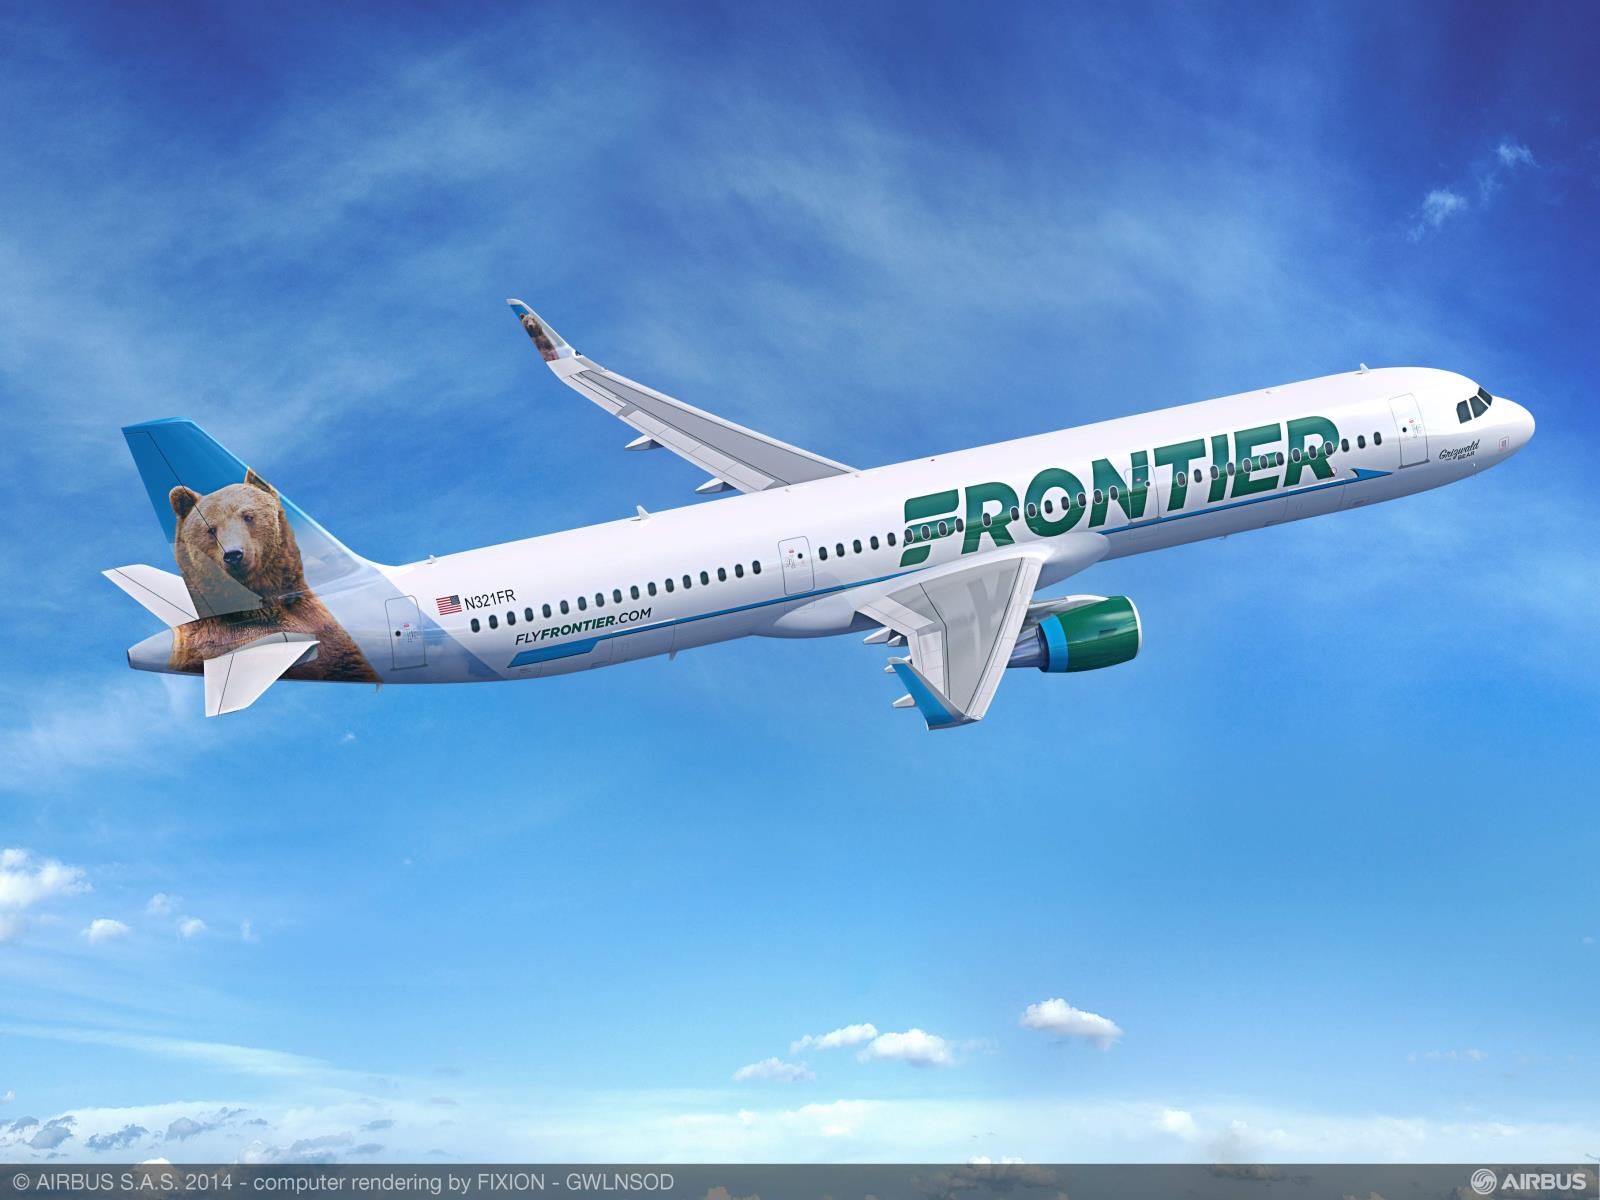 Frontier Airlines Announces 8 New Routes, Adds 3 Summer Destinations